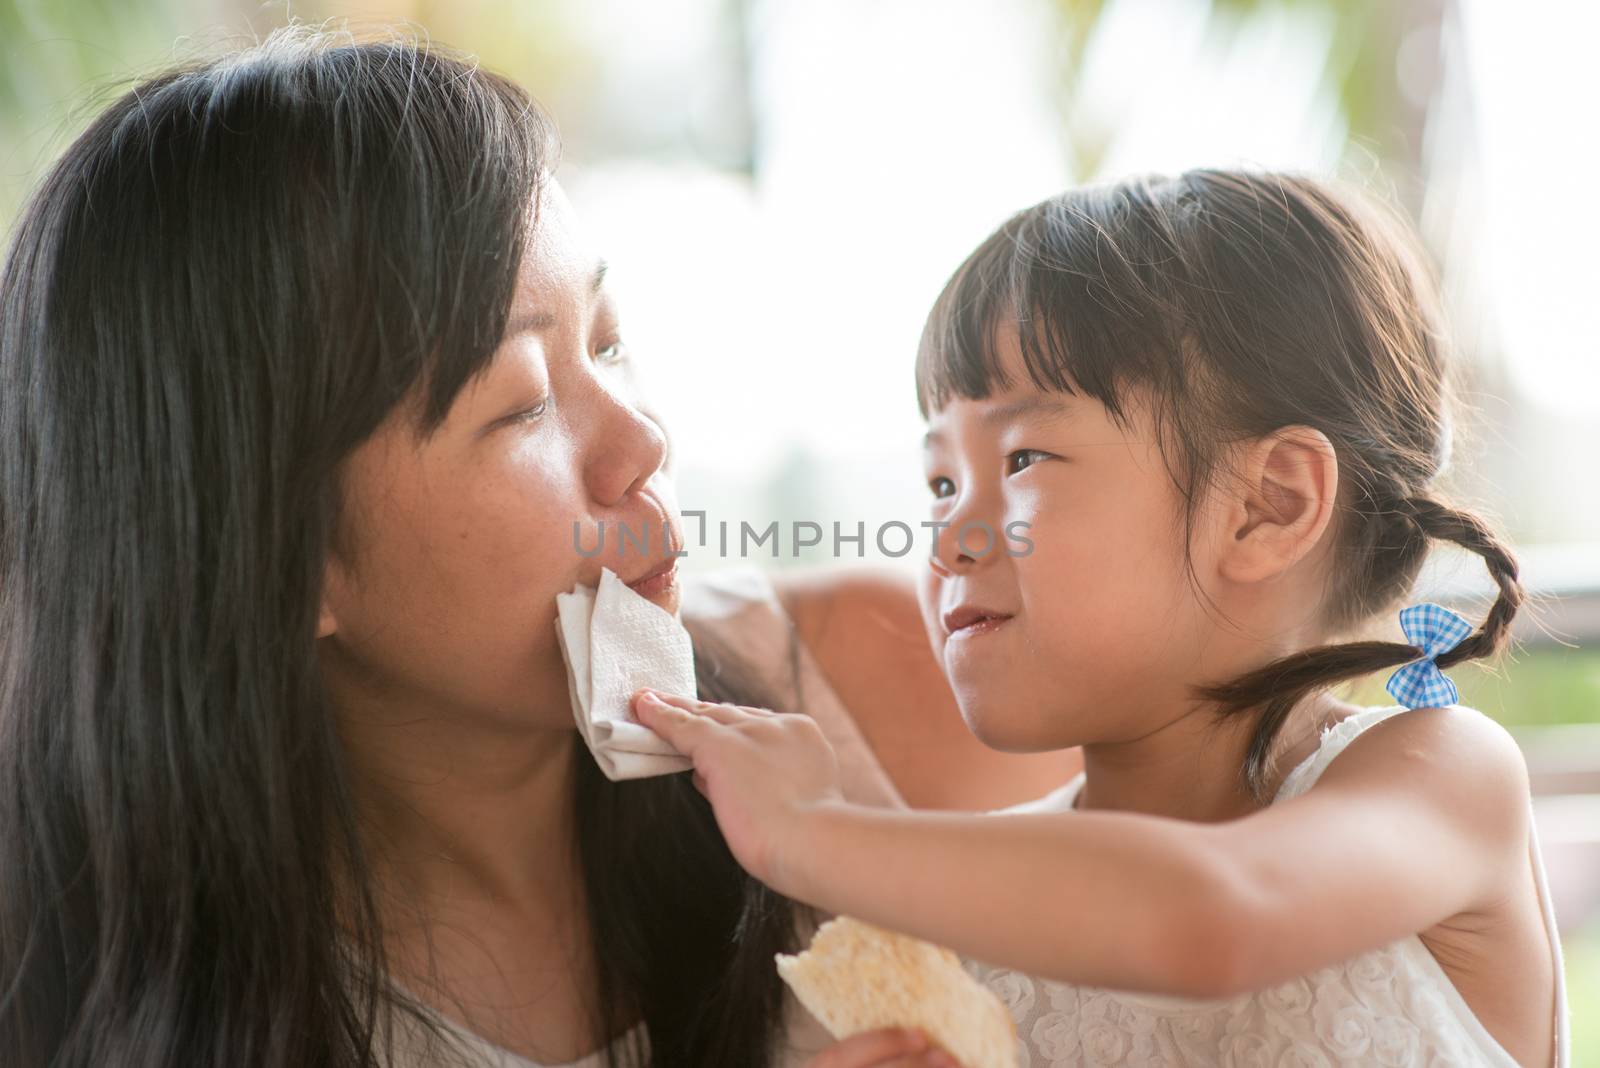 Child wipes mouth for her mom at cafe. Asian family outdoor lifestyle with natural light.